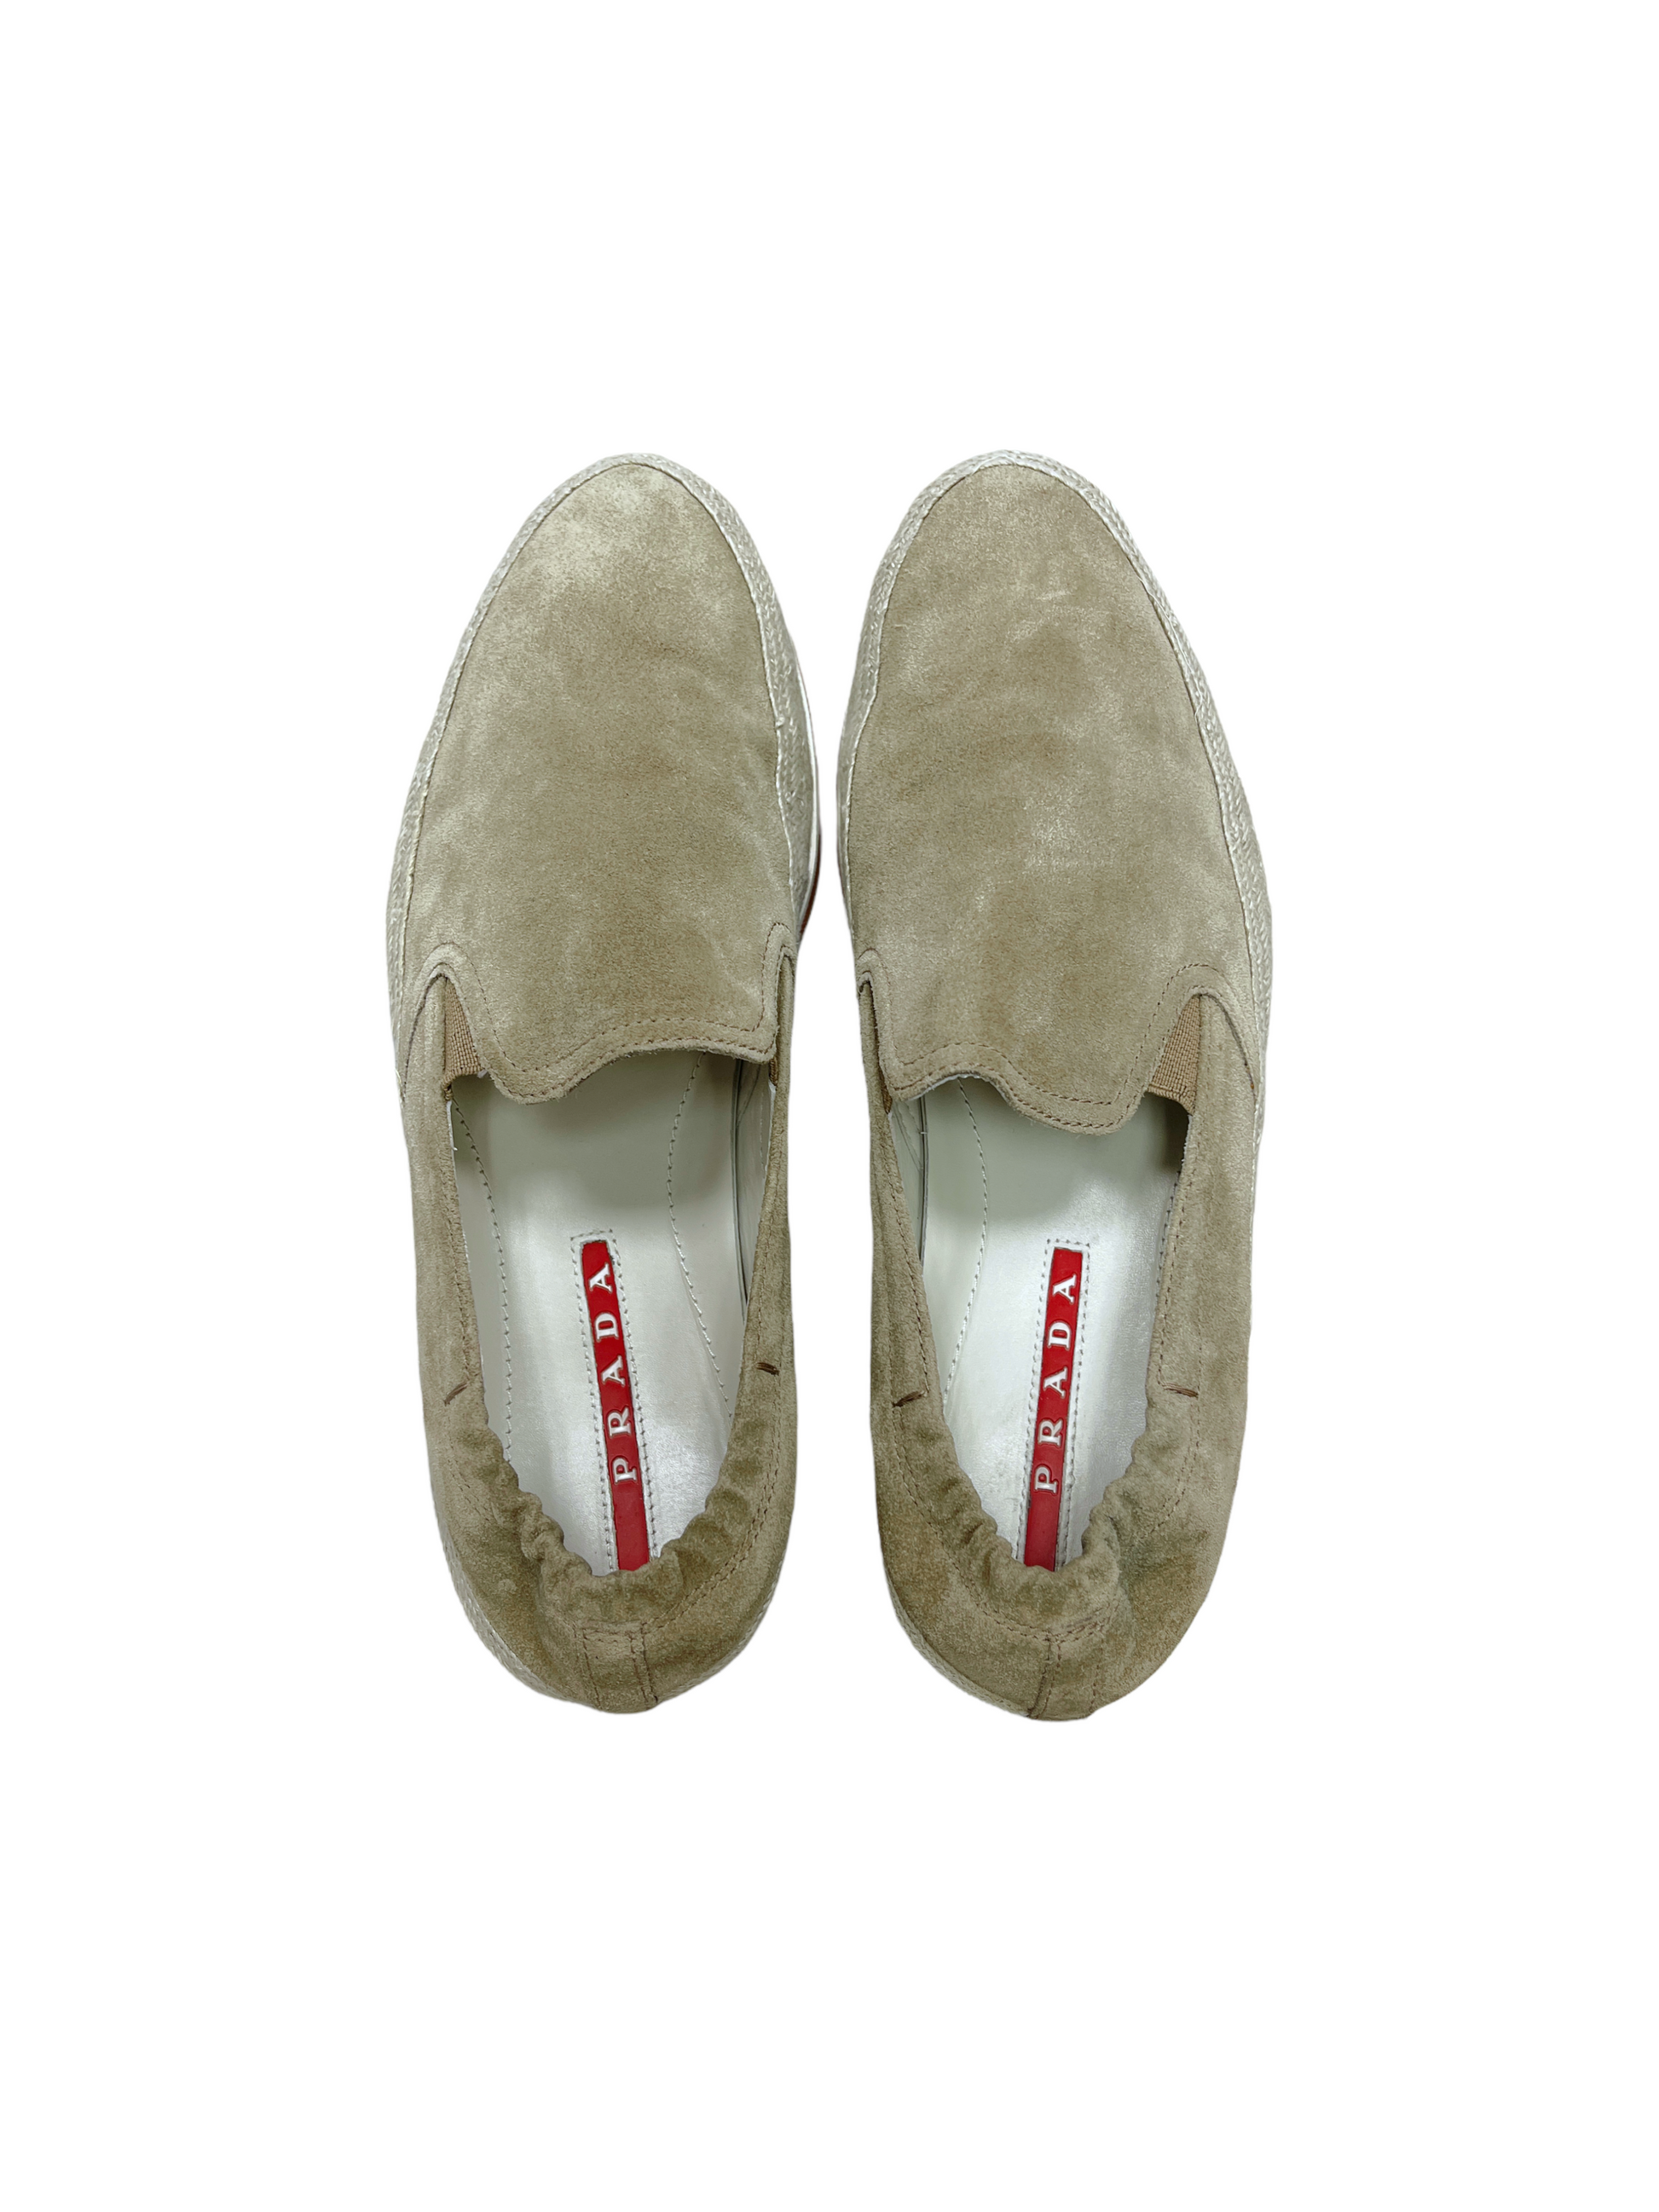 Prada Tan Suede Espadrilles 7 US — Genuine Design Luxury Consignment for Men. New & Pre-Owned Clothing, Shoes, & Accessories. Calgary, Canada